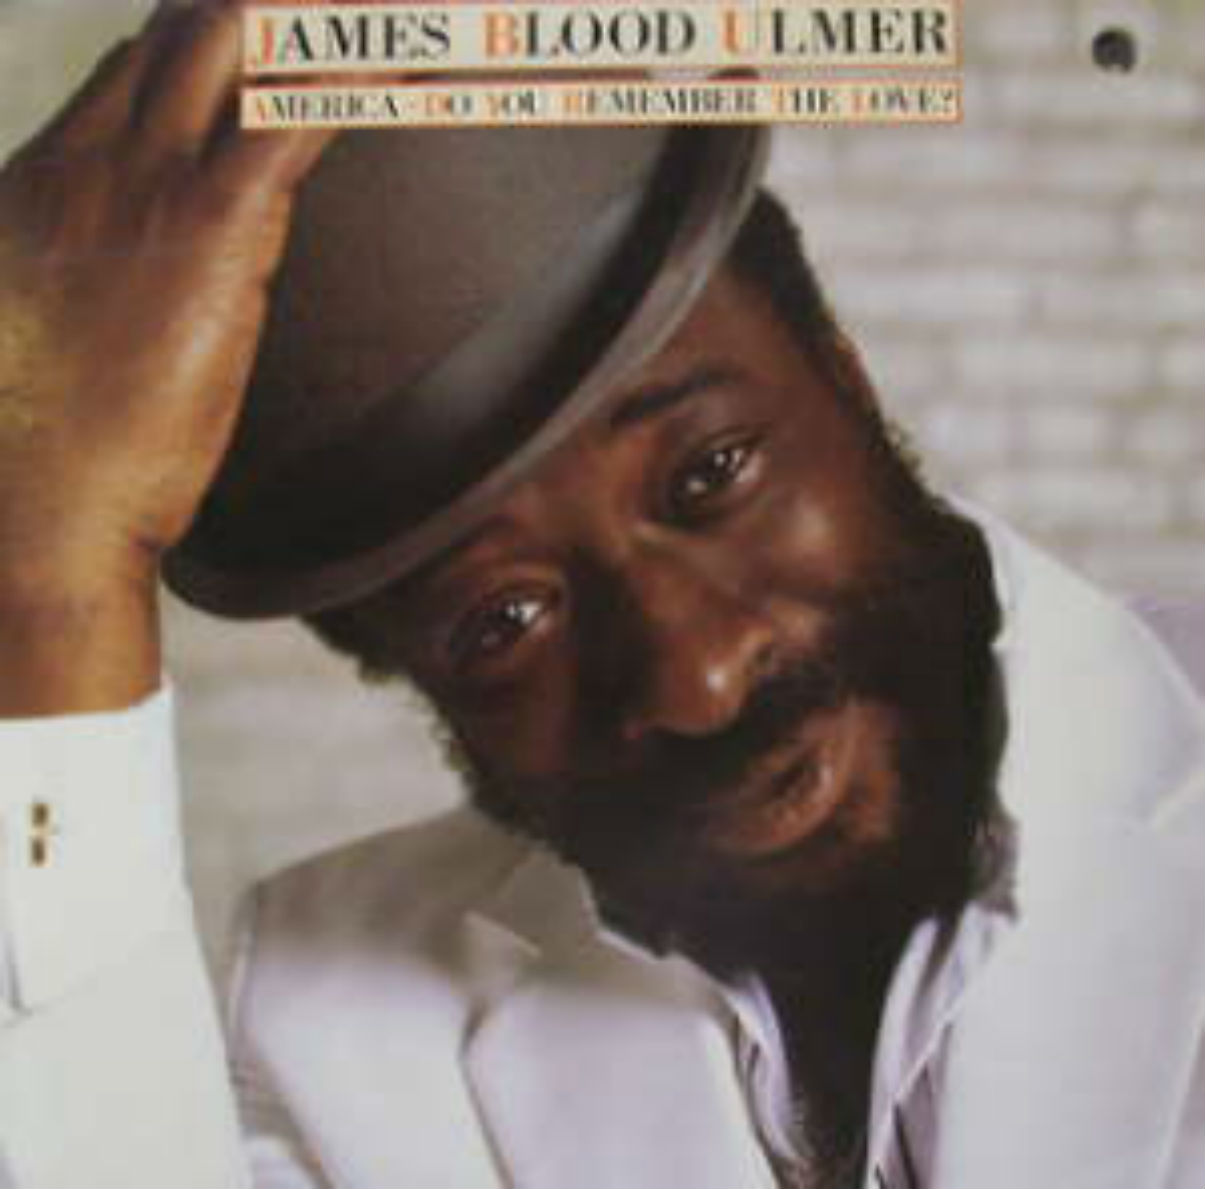 James Blood Ulmer / America - Do You Remember The Love?